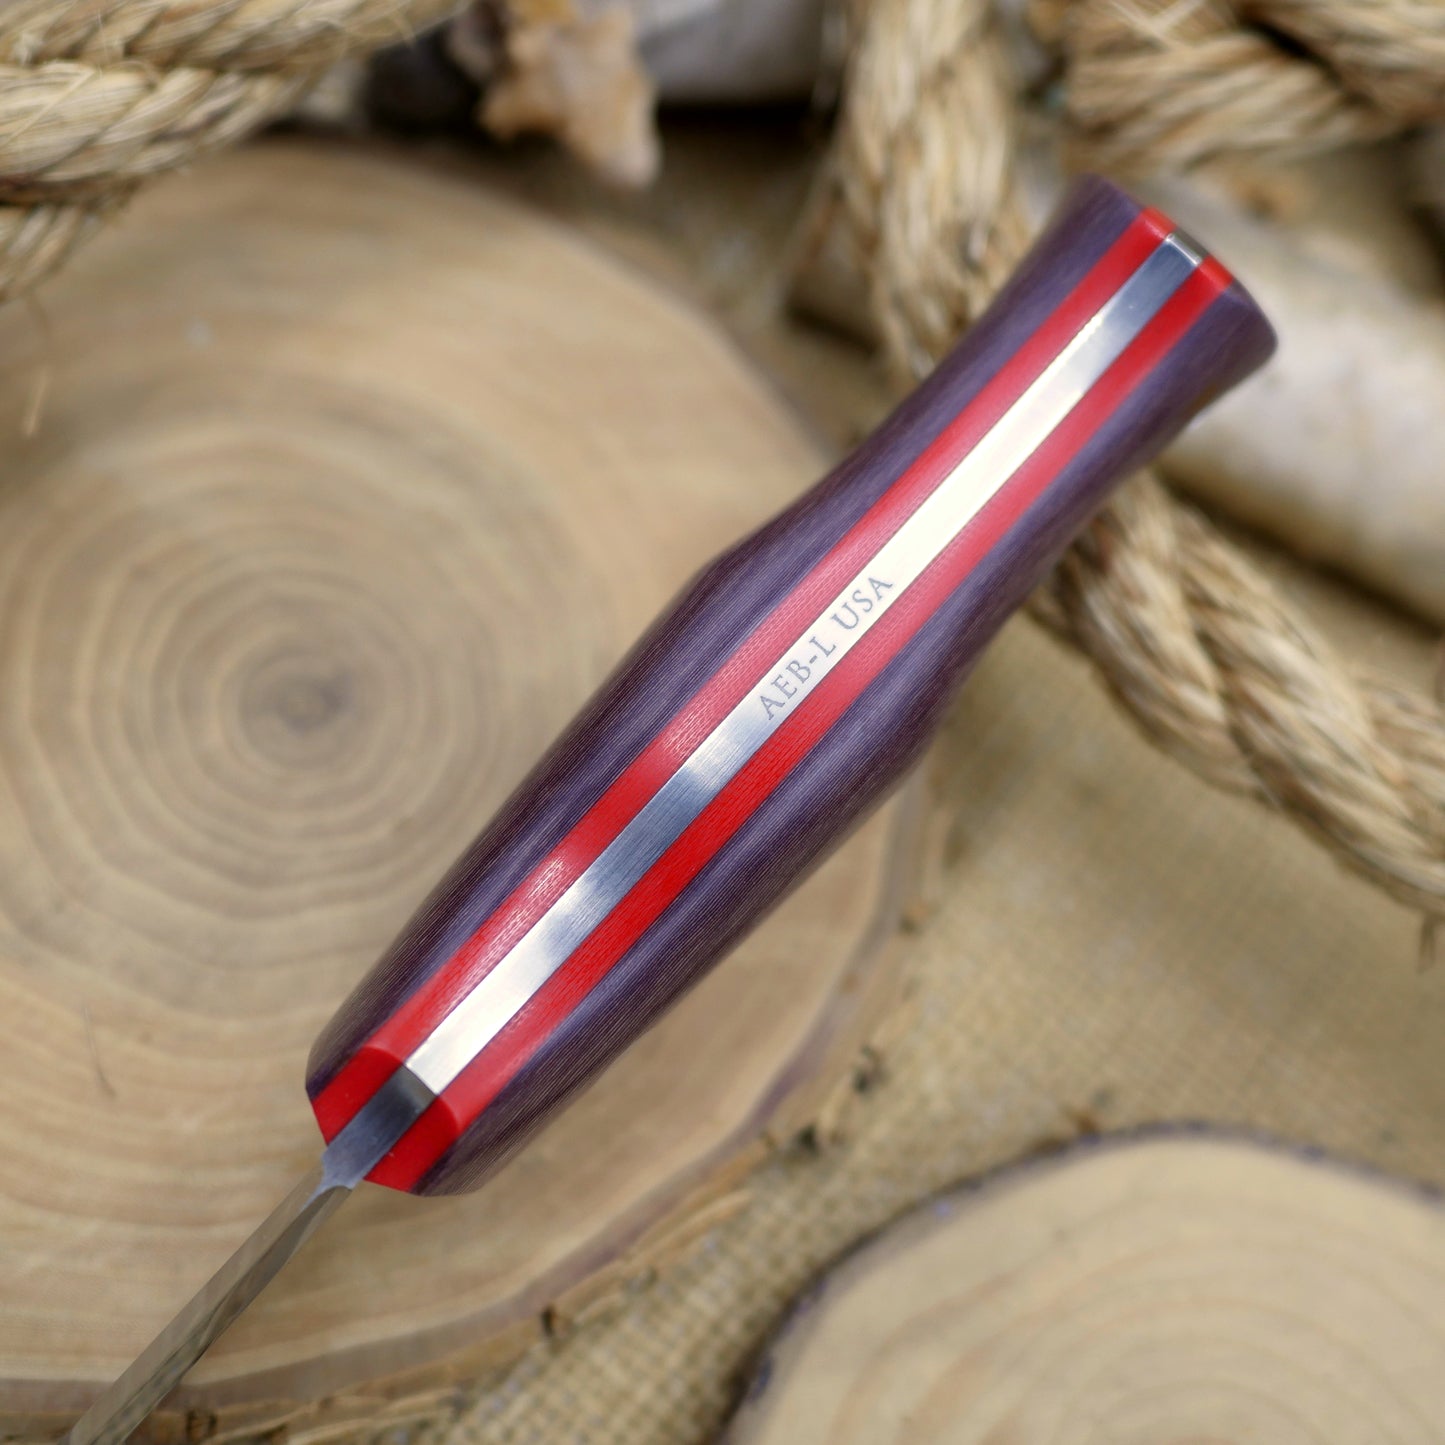 Classic: AEB-L, Red & Tan Richlite, Bright Red G10 Liners